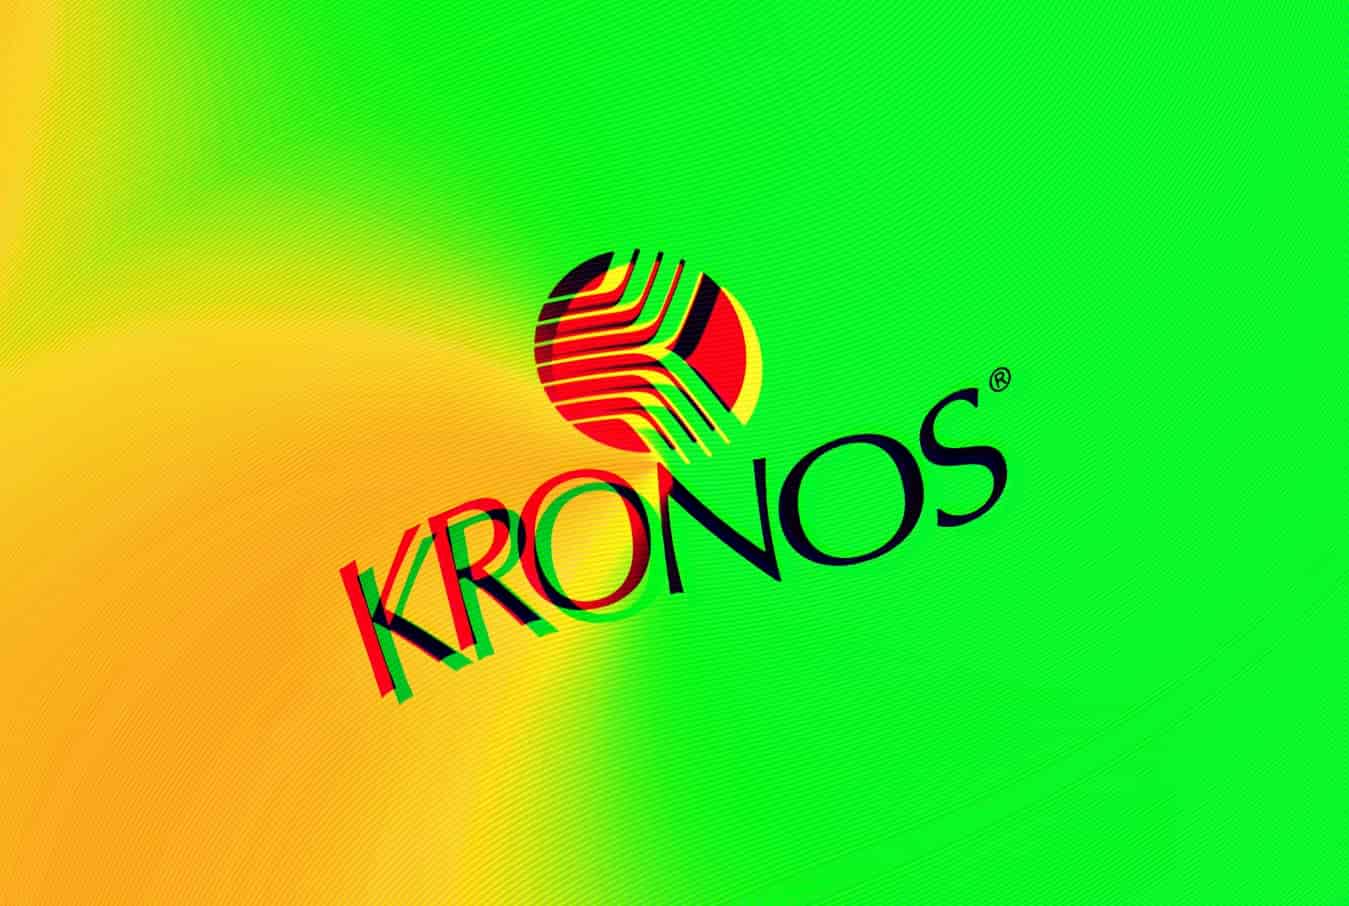 Top workforce management firm Kronos hit by ransomware attack